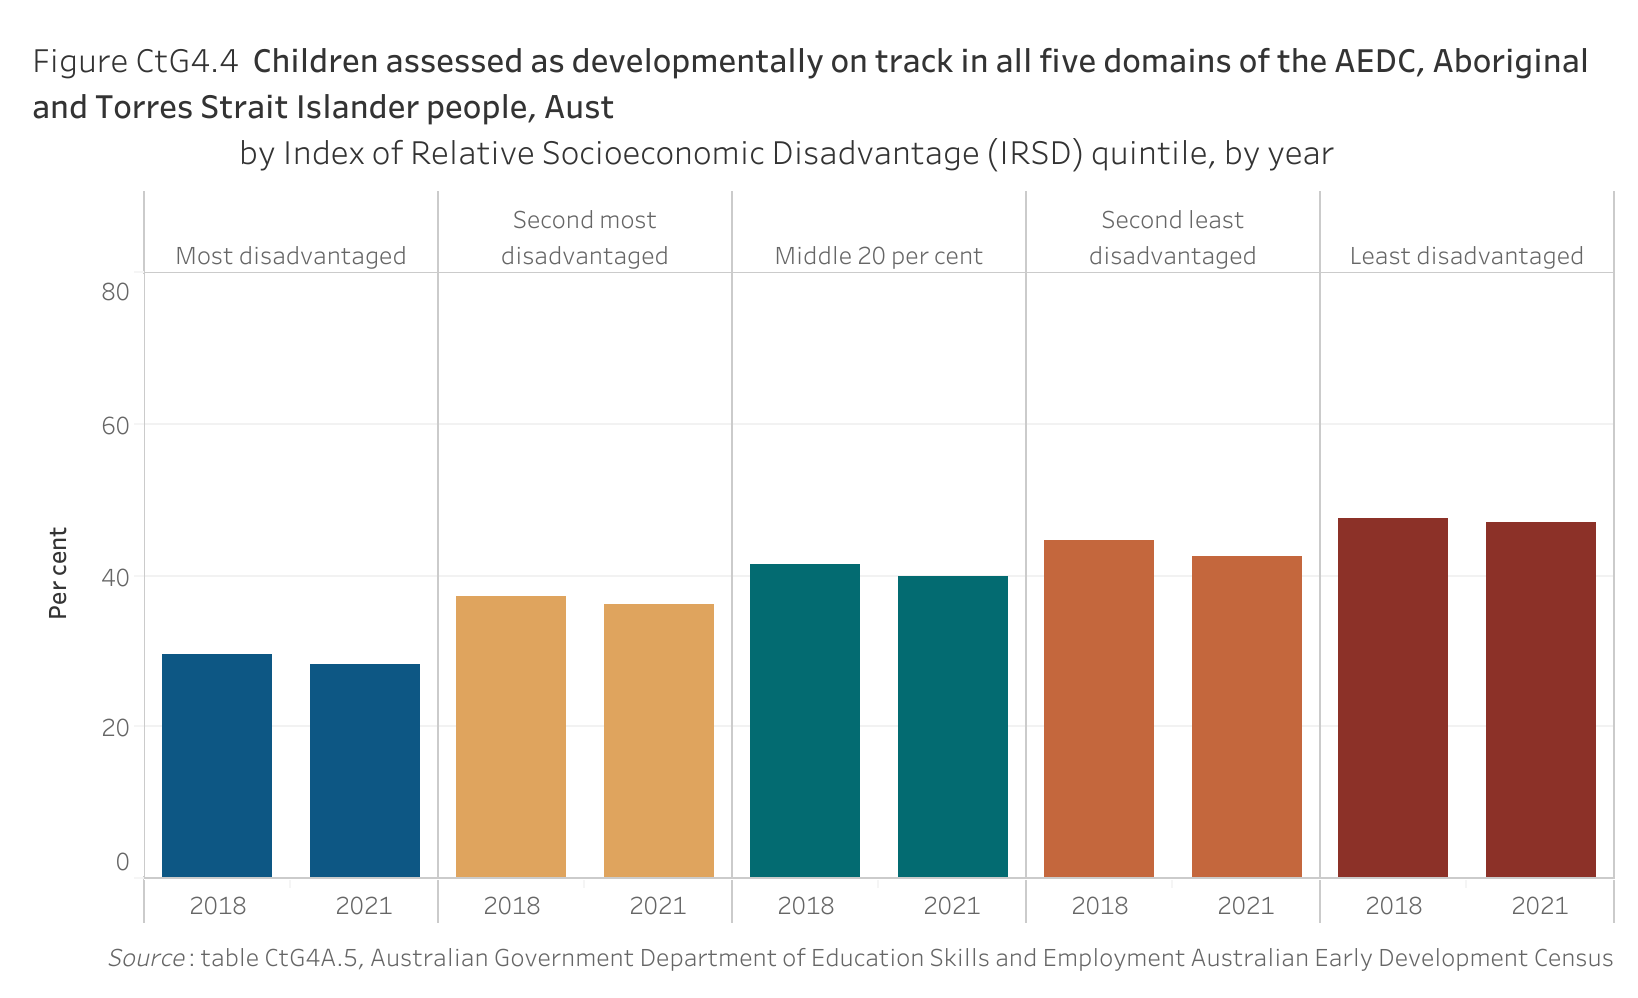 Figure CtG4.4. Bar chart showing the proportion of Aboriginal and Torres Strait Islander children assessed as developmentally on track in all five domains of the Australian Early Development Census (AEDC) in Australia, by Index of Relative Socioeconomic Disadvantage (IRSD) quintile and by year. Data table of figure CtG4.4 is below.